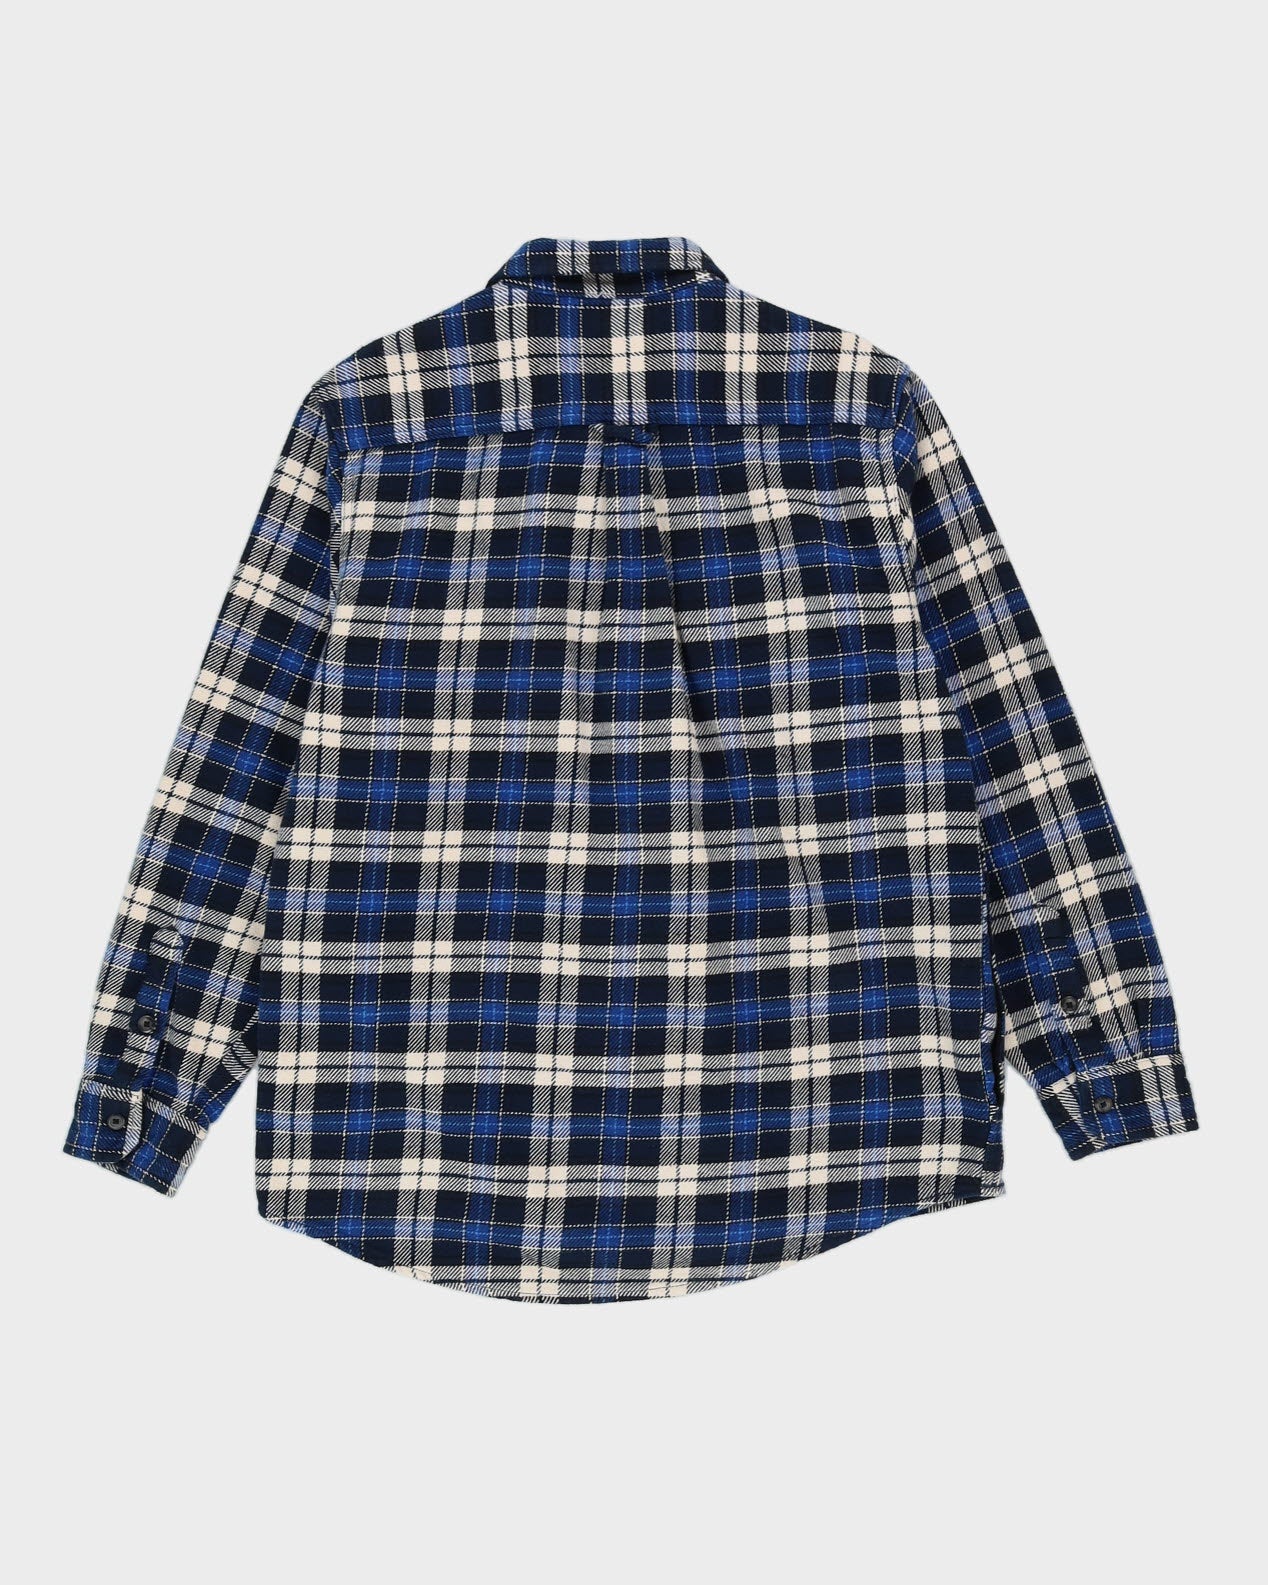 Orvis Blue Check Patterned Flannel Shirt - L